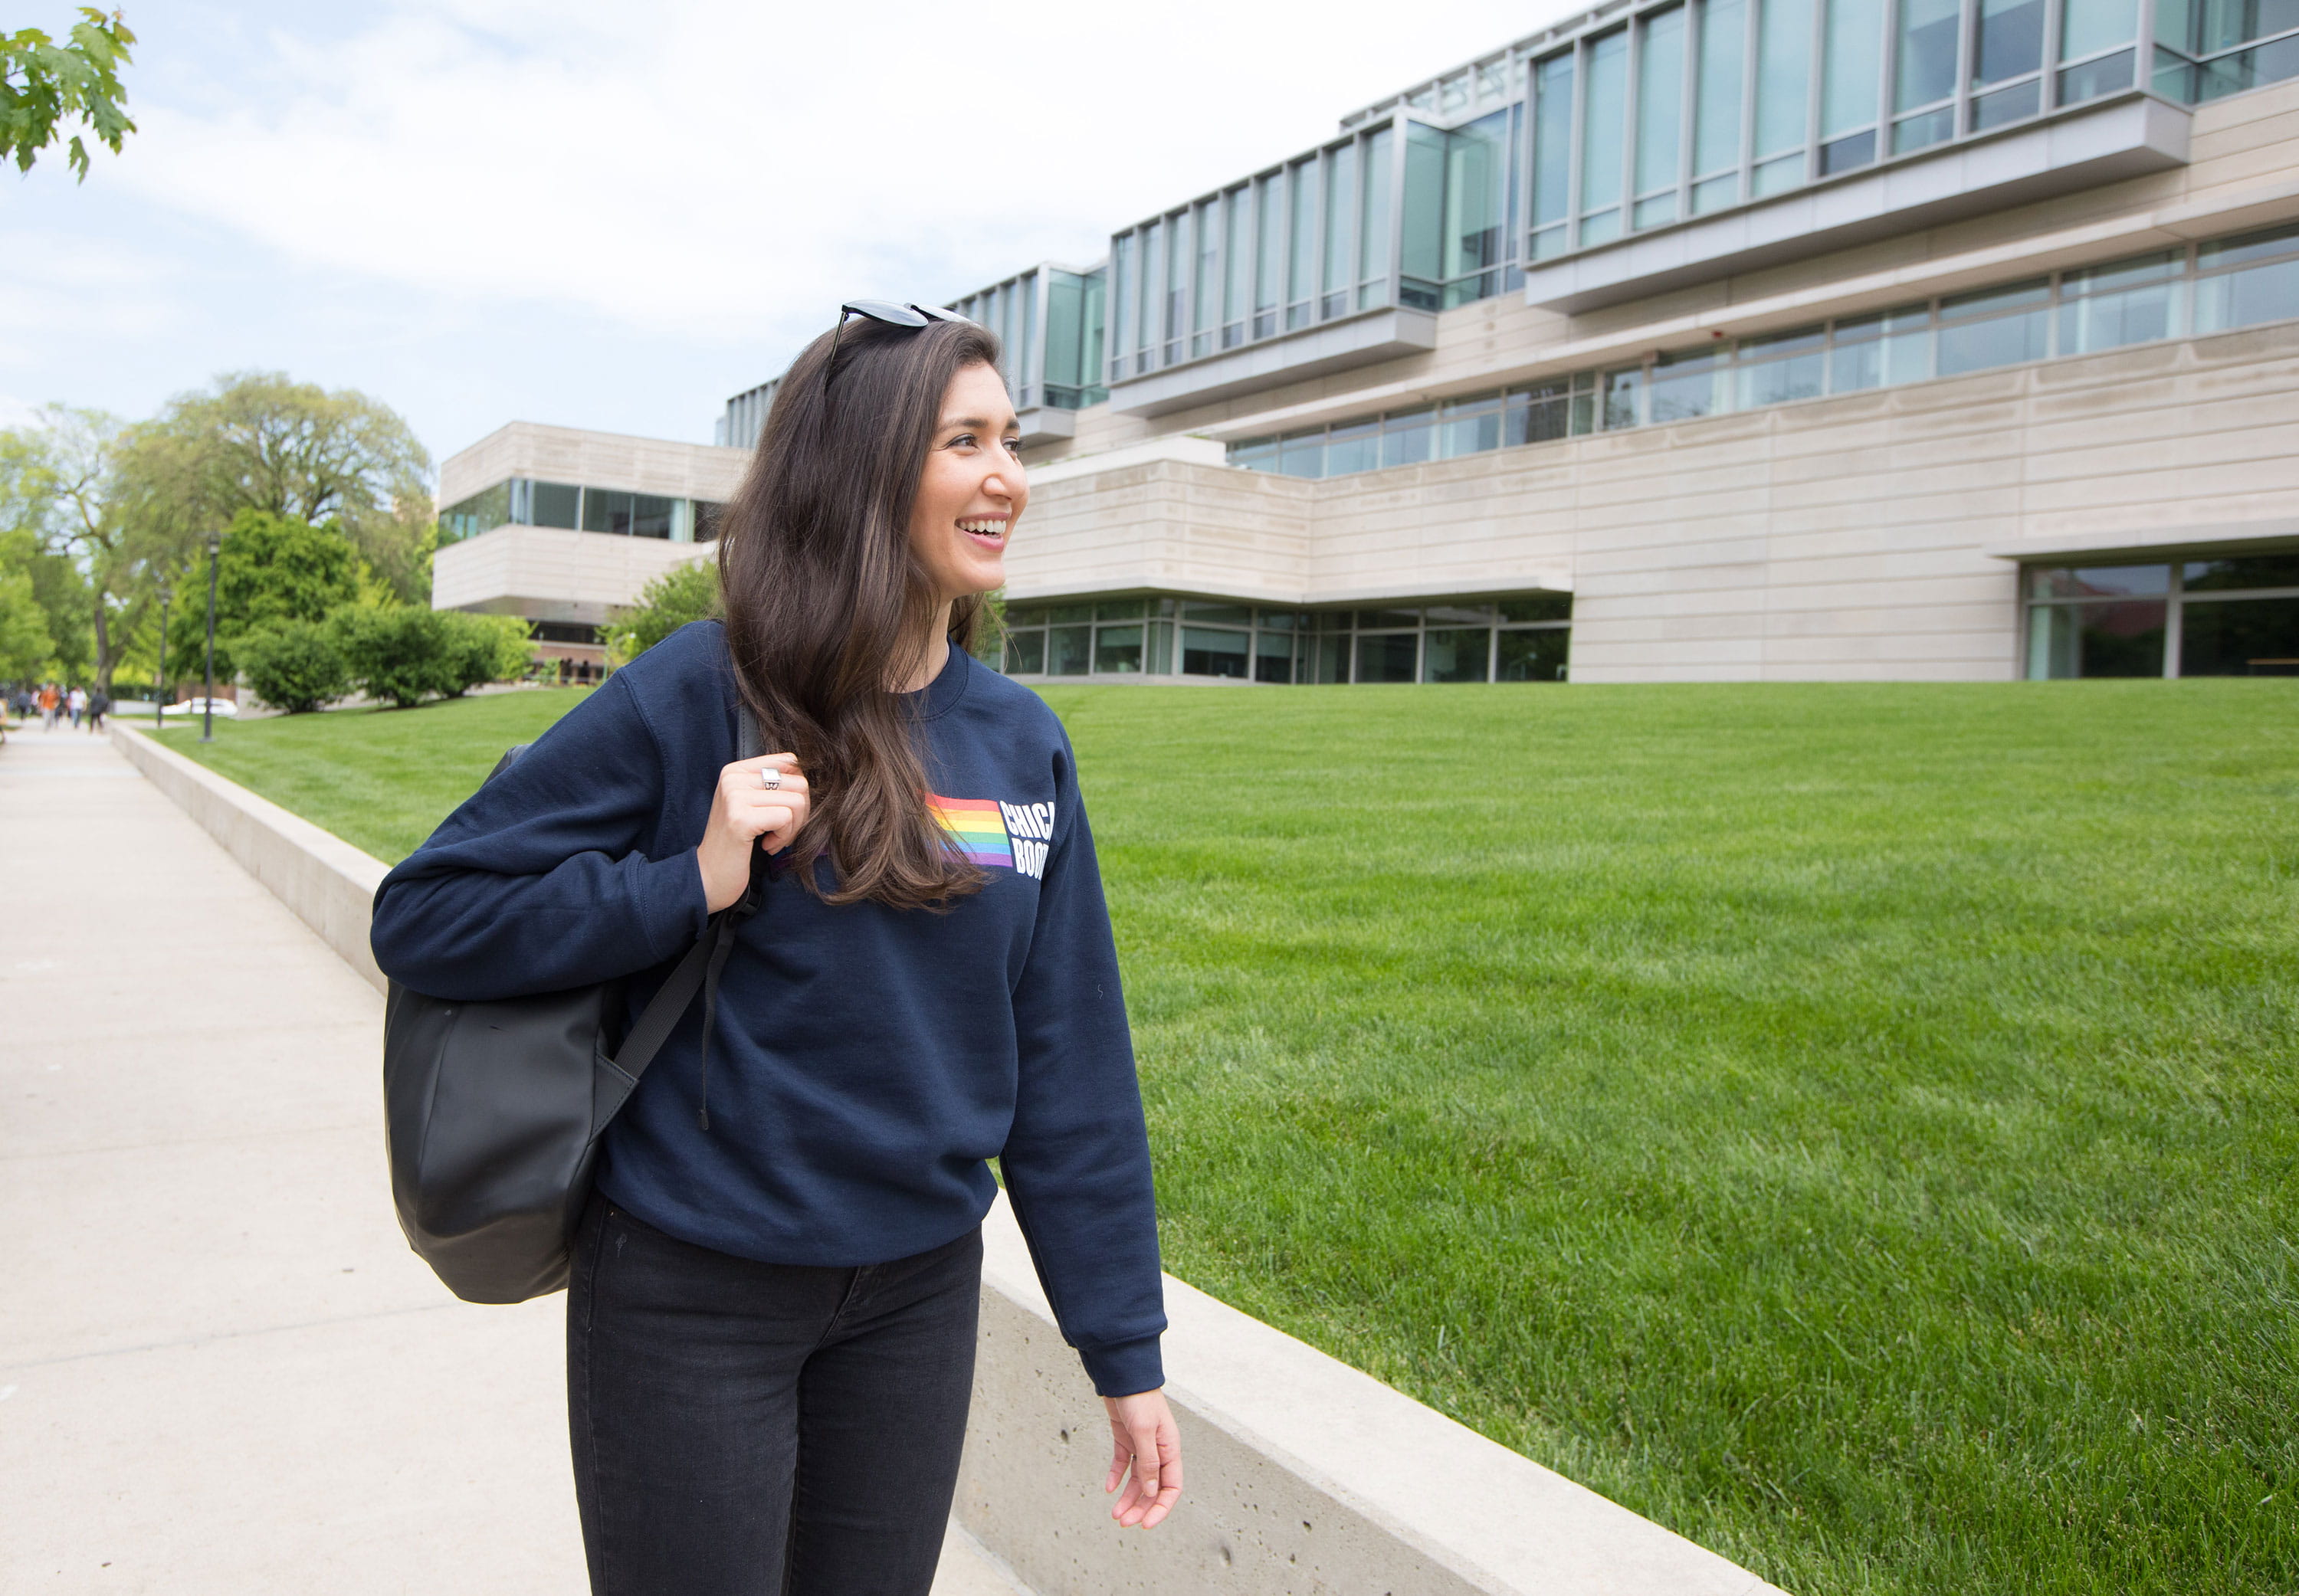 Picture Yourself Here: Why You Should Visit Campus | The University of ...